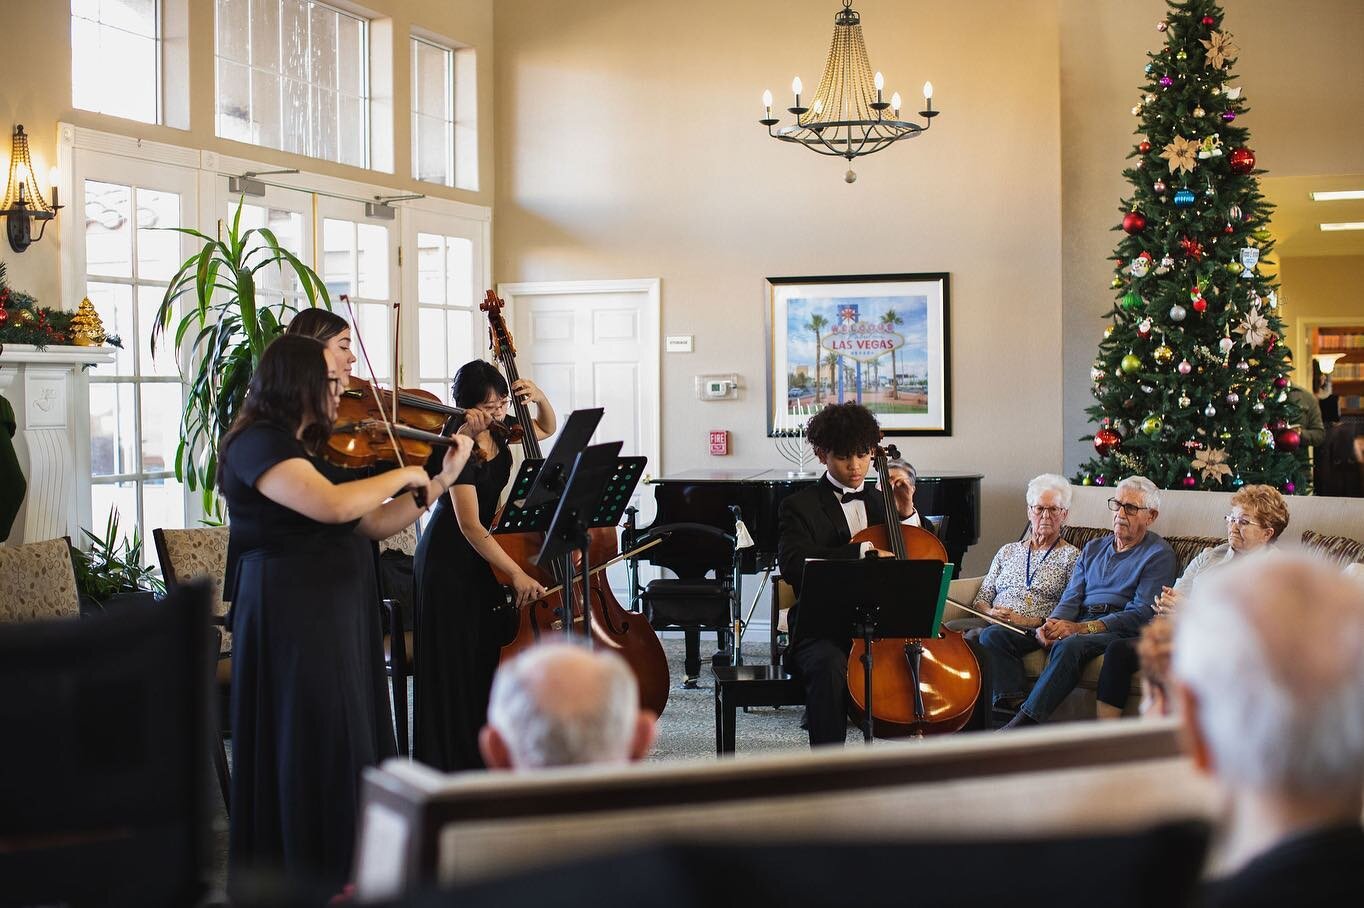 It was a pleasure to perform for the residents of Aegis Living! 🎶 🎻 👏 
@aegislivingseniors 

📸 Photo Credits:
@meobaakliniphotography